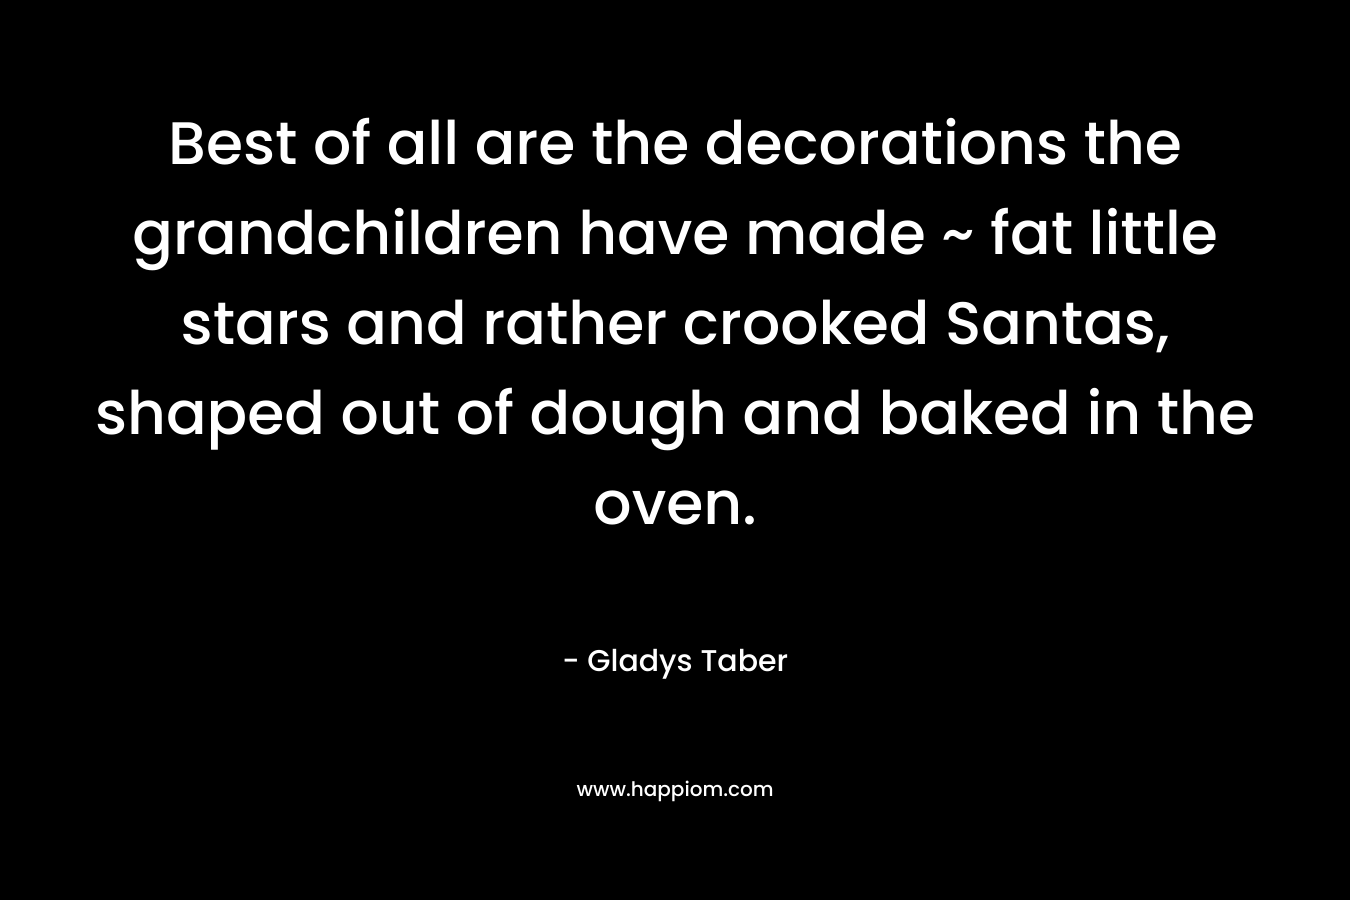 Best of all are the decorations the grandchildren have made ~ fat little stars and rather crooked Santas, shaped out of dough and baked in the oven.